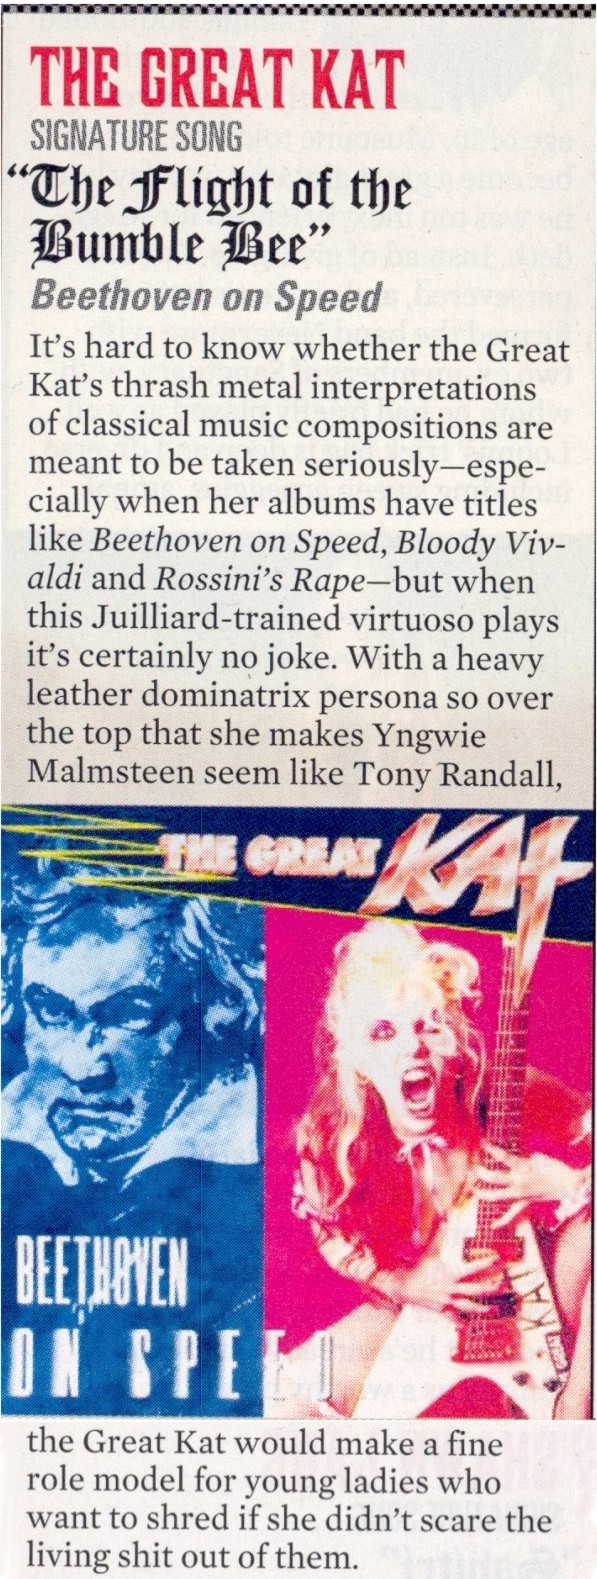 GUITAR WORLD MAGAZINE NAMES THE GREAT KAT "50 FASTEST GUITARISTS OF ALL TIME"!!